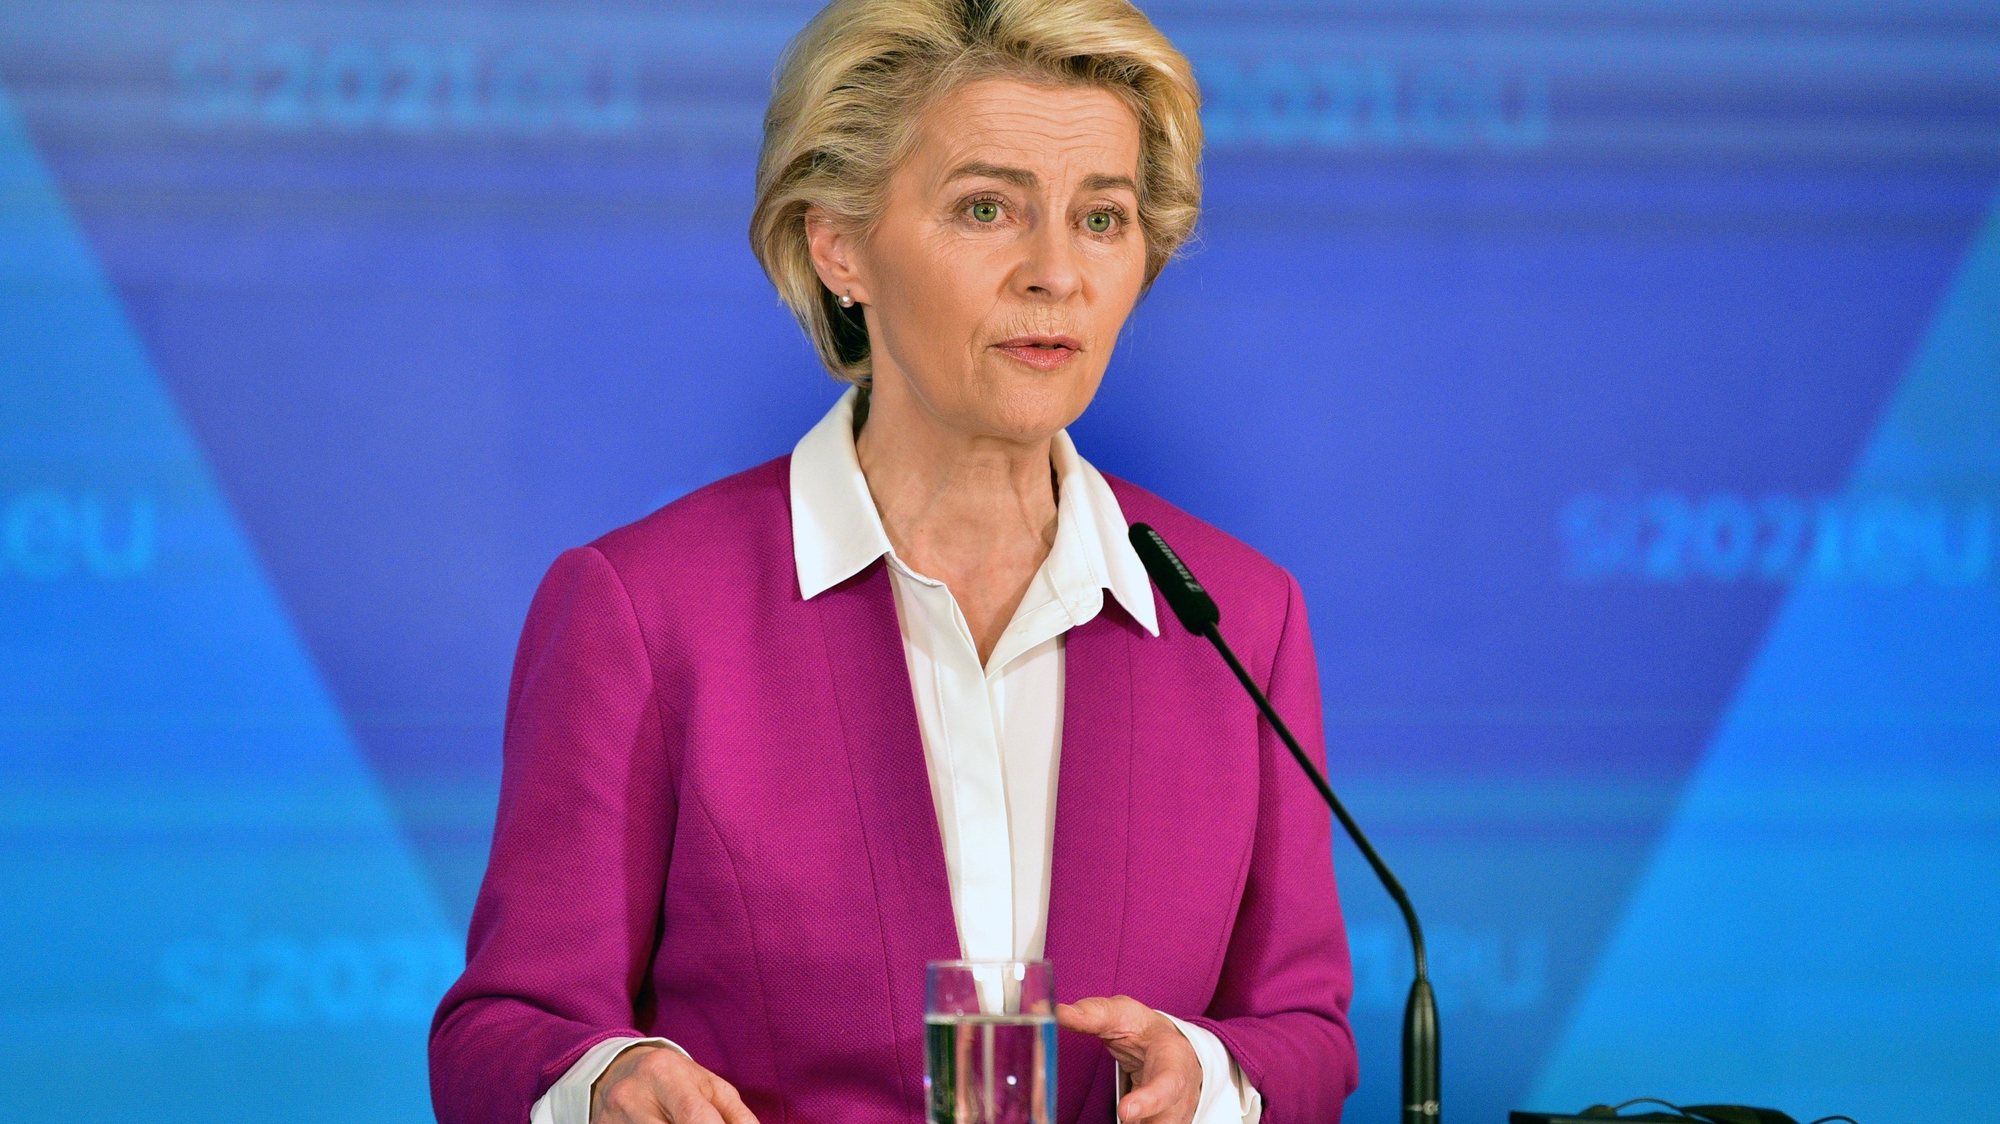 epa09509101 President of the European Commission, Ursula von der Leyen, attends a press conference during an EU-Western Balkans summit in Brdo pri Kranju, in Kranj, Slovenia, 06 October 2021. The summit, part of the EU&#039;s strategic engagement with the Western Balkans, is hosted by the Slovenian presidency of the Council and brings together leaders from EU member states and the six Western Balkans partners (Albania, Bosnia and Herzegovina, Serbia, Montenegro, North Macedonia and Kosovo).  EPA/IGOR KUPLJENIK